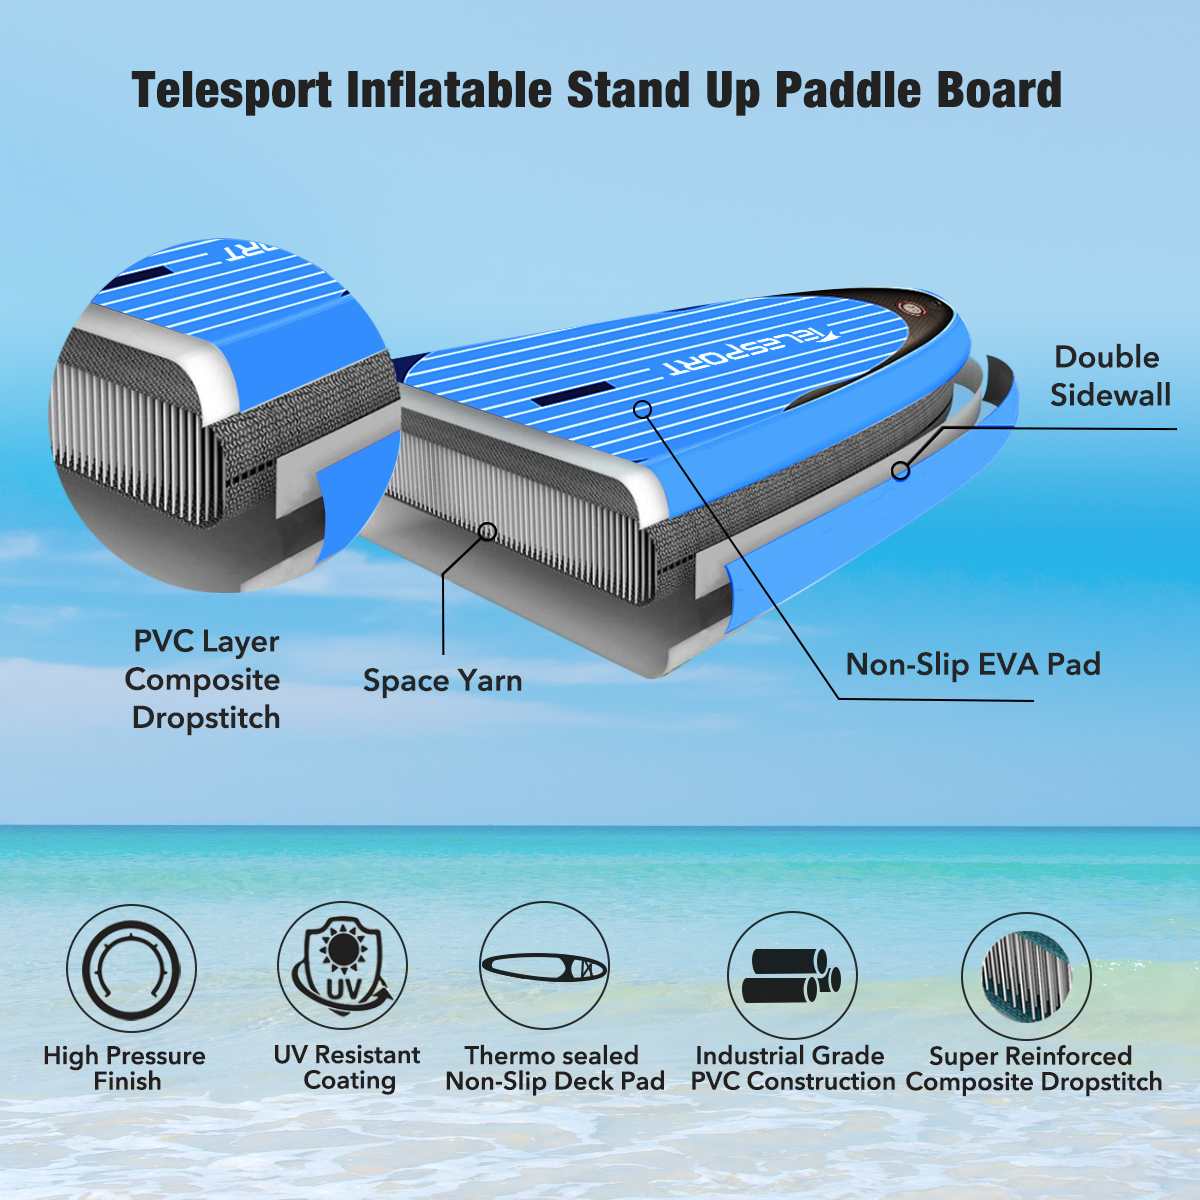 Telesport Inflatable Stand Up Paddle Board 10.6ft with SUP Carry Bag, Adjustable Paddles Non-Slip Deck, Leash and Fin for Padding Surfing - image 4 of 7